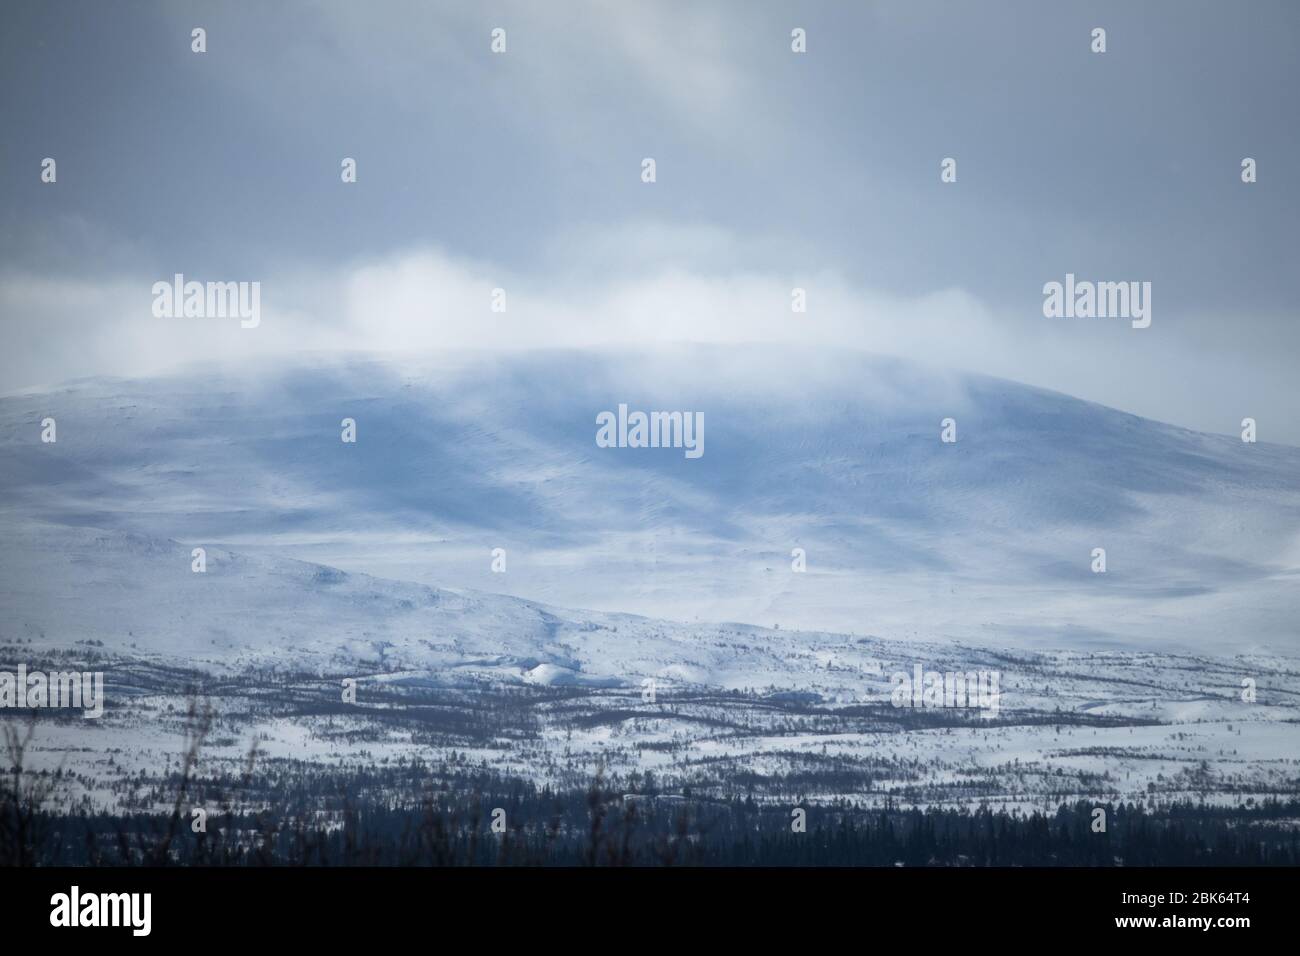 Winter landscape with cloudy snowy mountains. Stock Photo